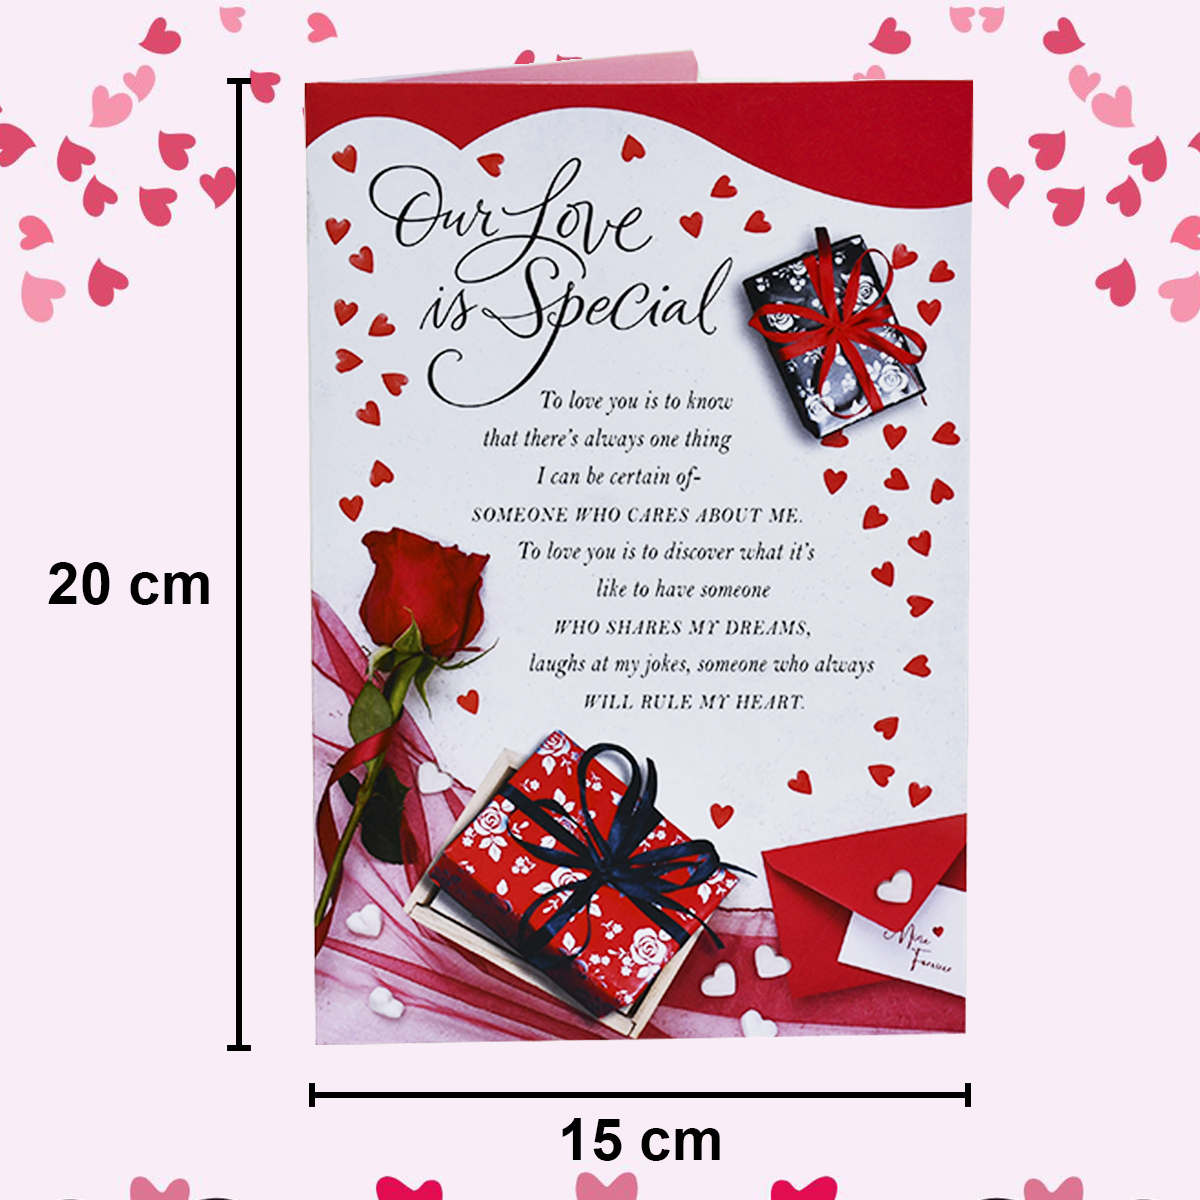 Buy Midiron Love Gift Combo For Wife/Girlfriend/Special One|Anniversary Gift|  Valentines,Birthday Gift Hamper With Handmade Chocolate Box, Printed  Ceramic Coffee Mug & Love Greeting Card Online at Best Prices in India -  JioMart.